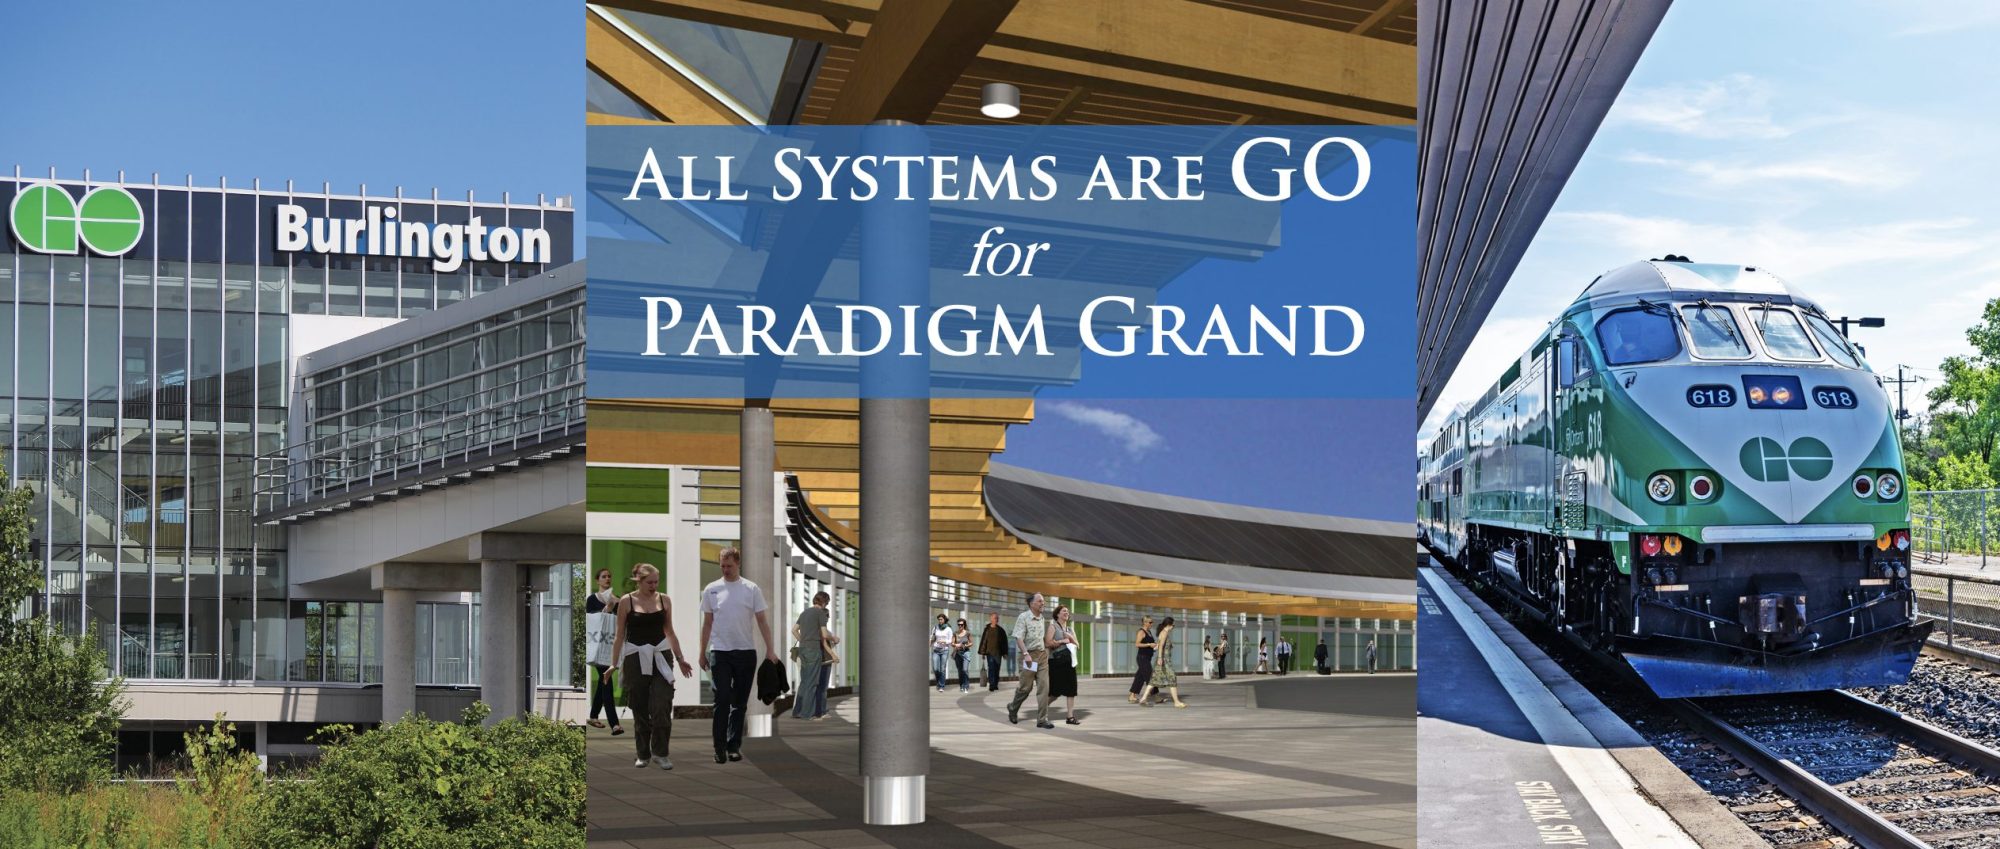 All Systems are GO for Paradigm Grand